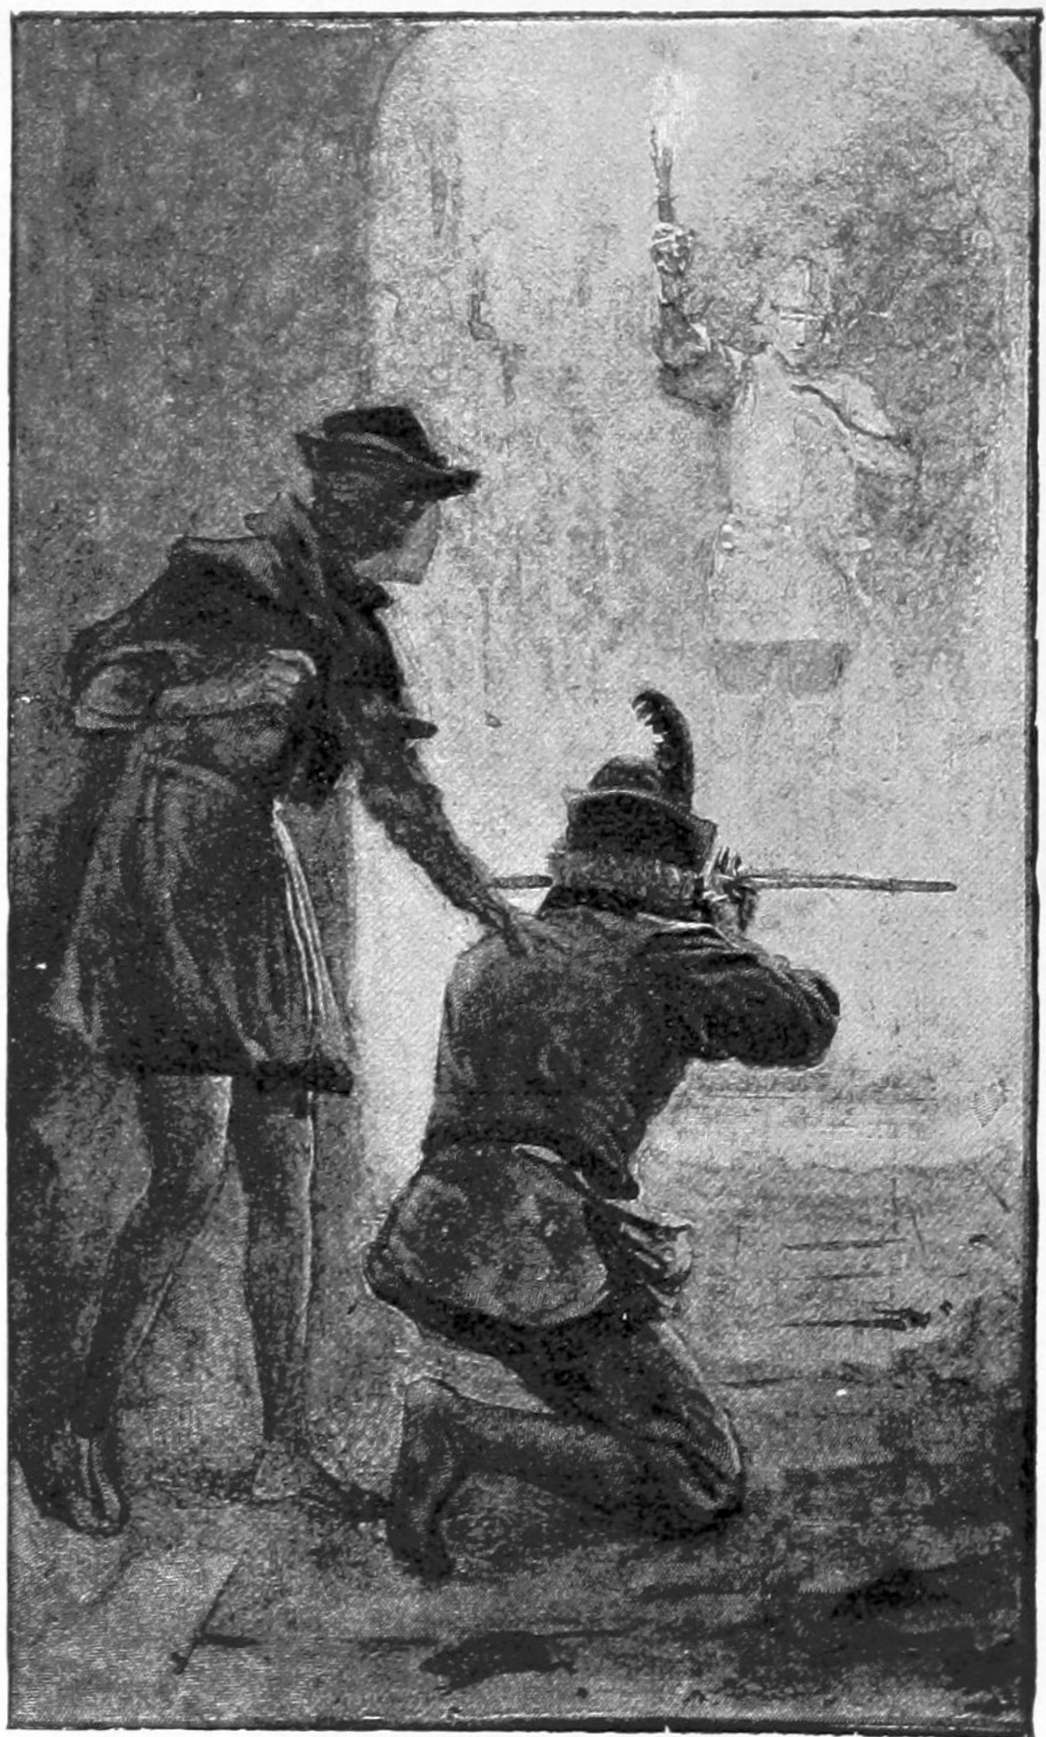 two brigands aiming at a guard in the dark